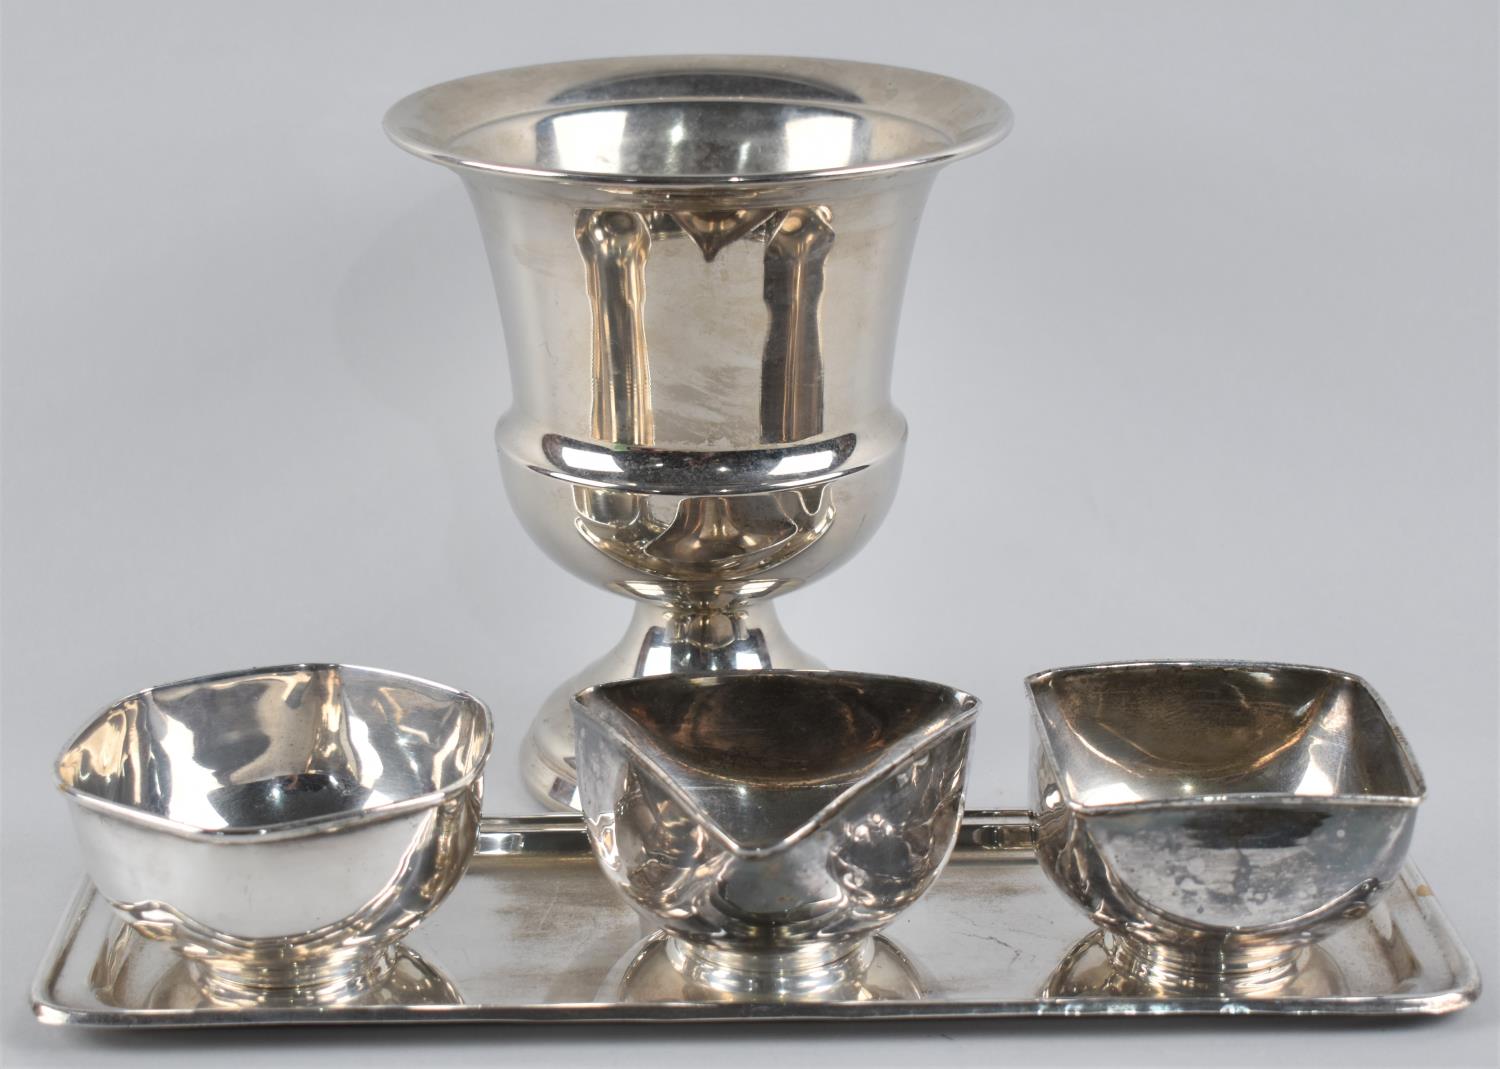 A Set of Three Silver Plated Olive and Pickle Pots with Tray by House of Fraser together with a